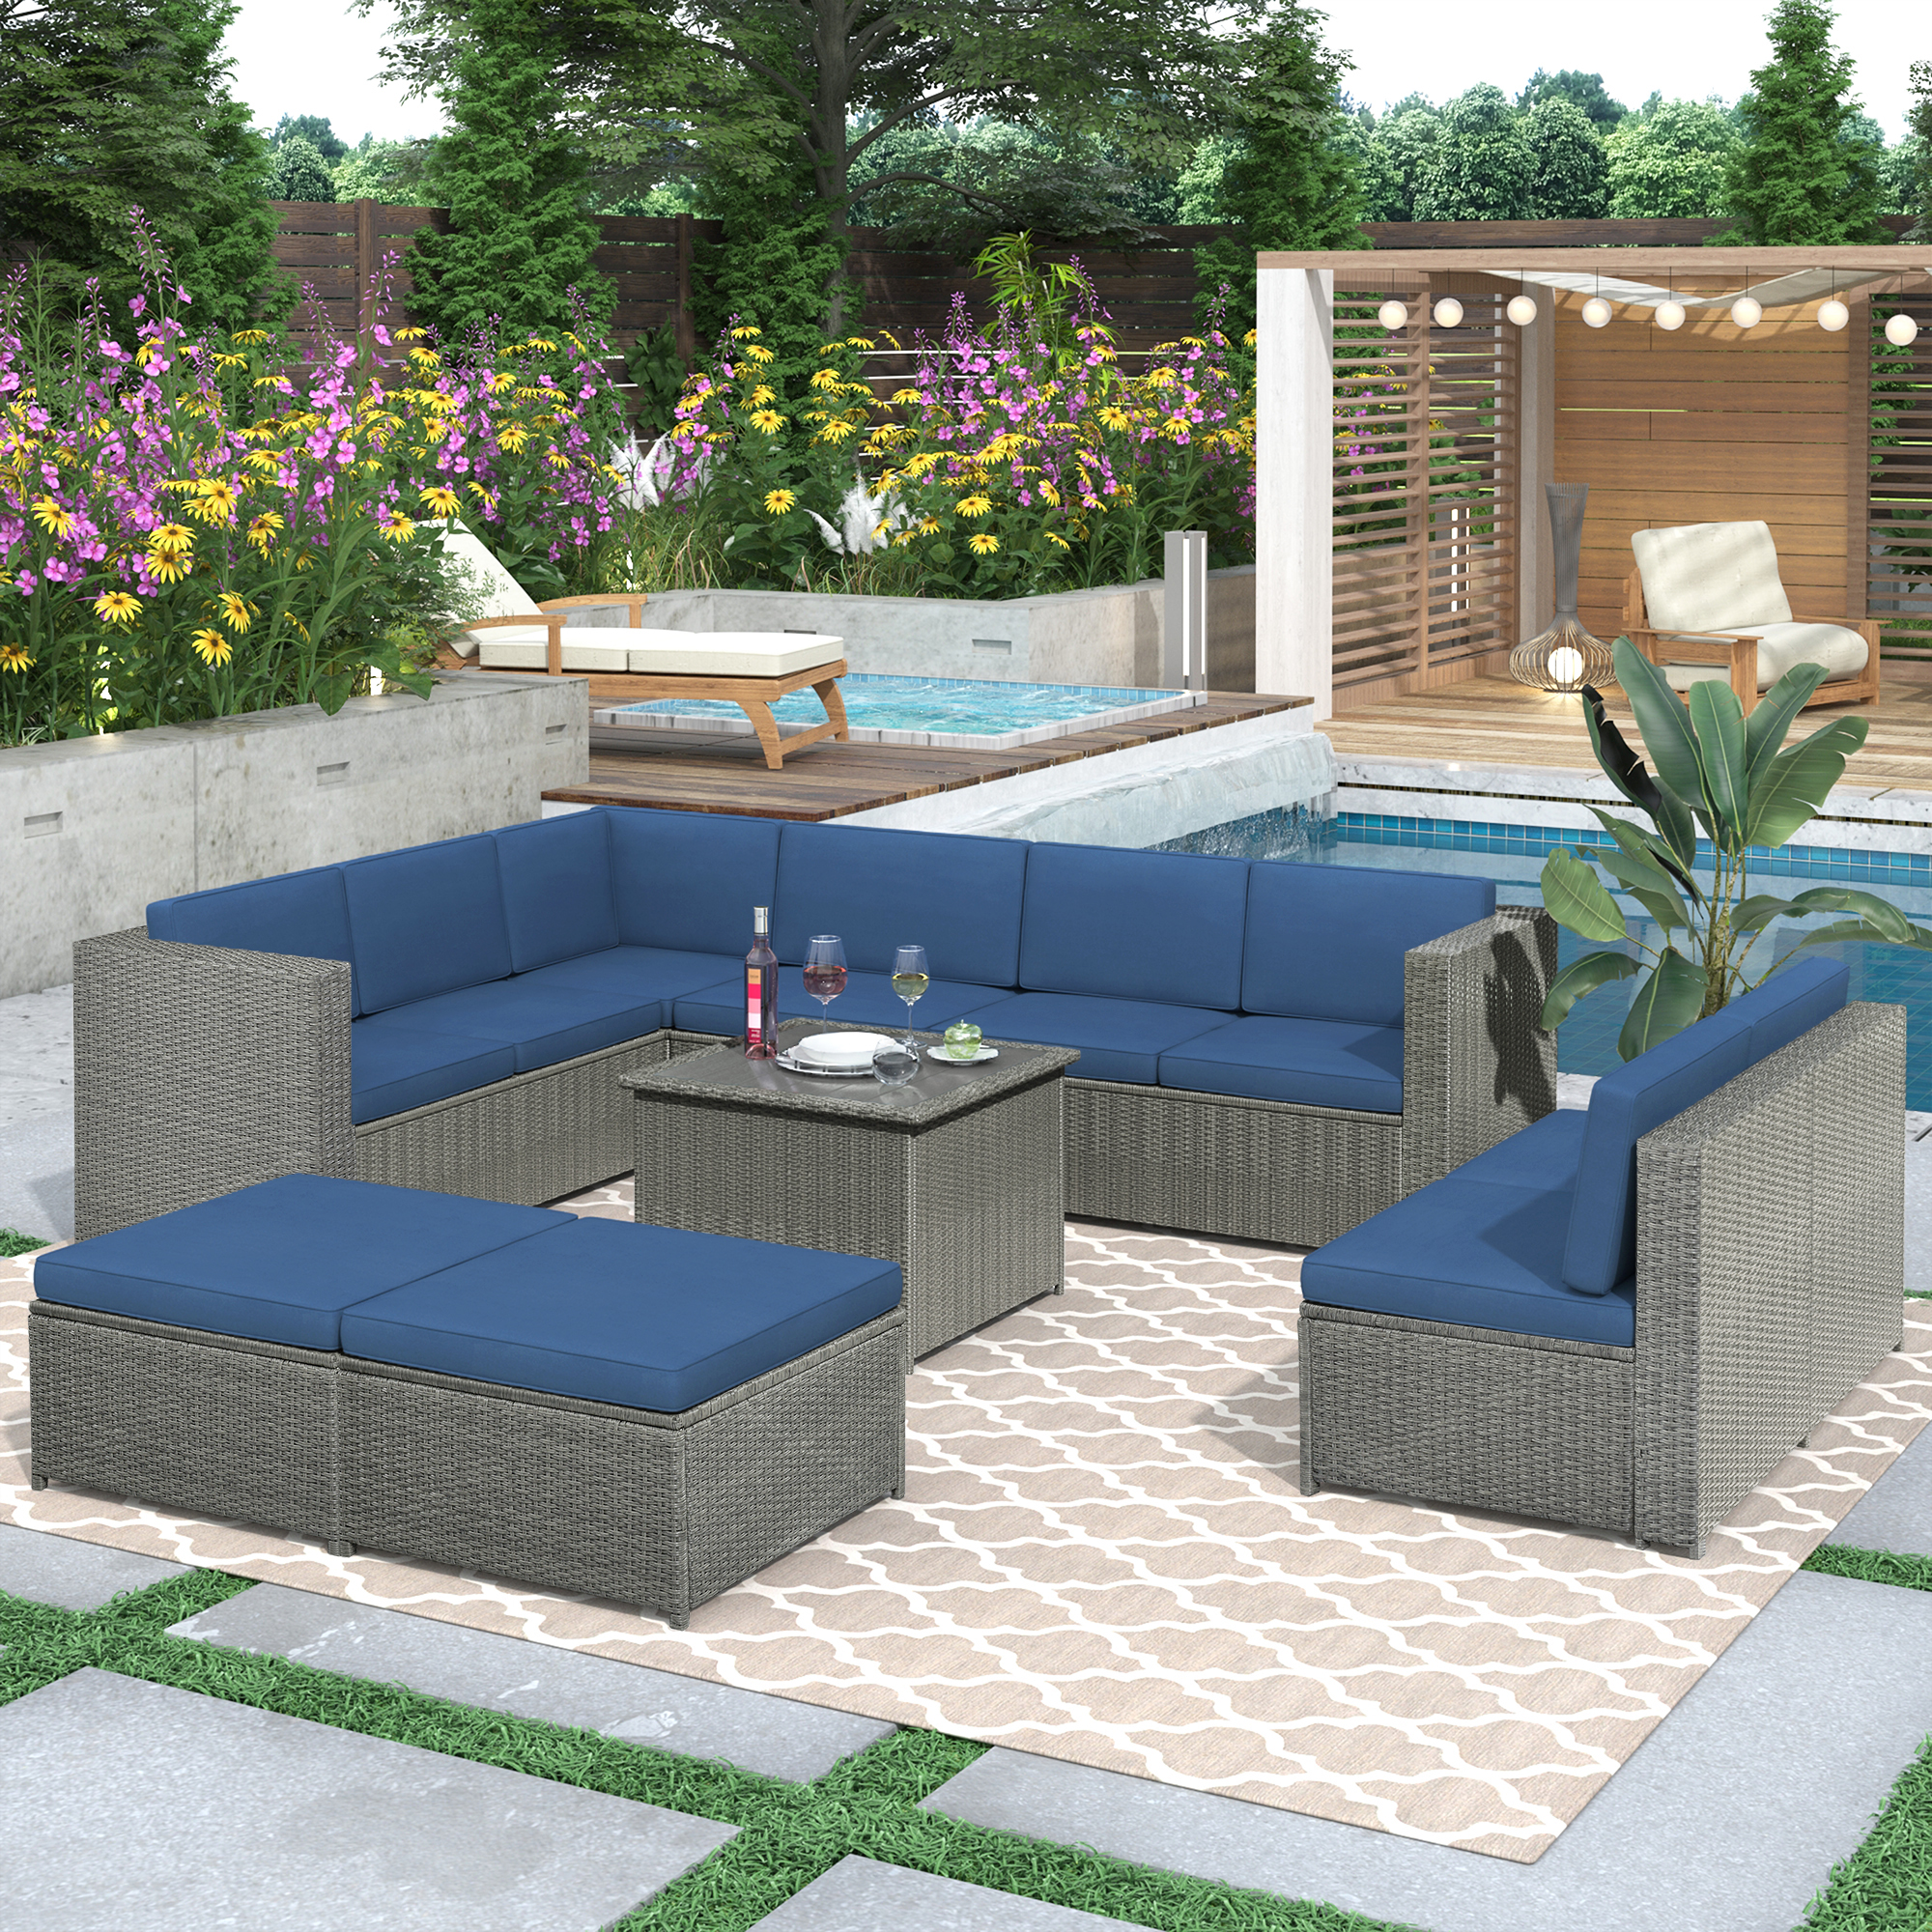 9 Piece Rattan Sectional Seating Group with Cushions and Ottoman, Patio Furniture Sets, Outdoor Wicker Sectional-Boyel Living